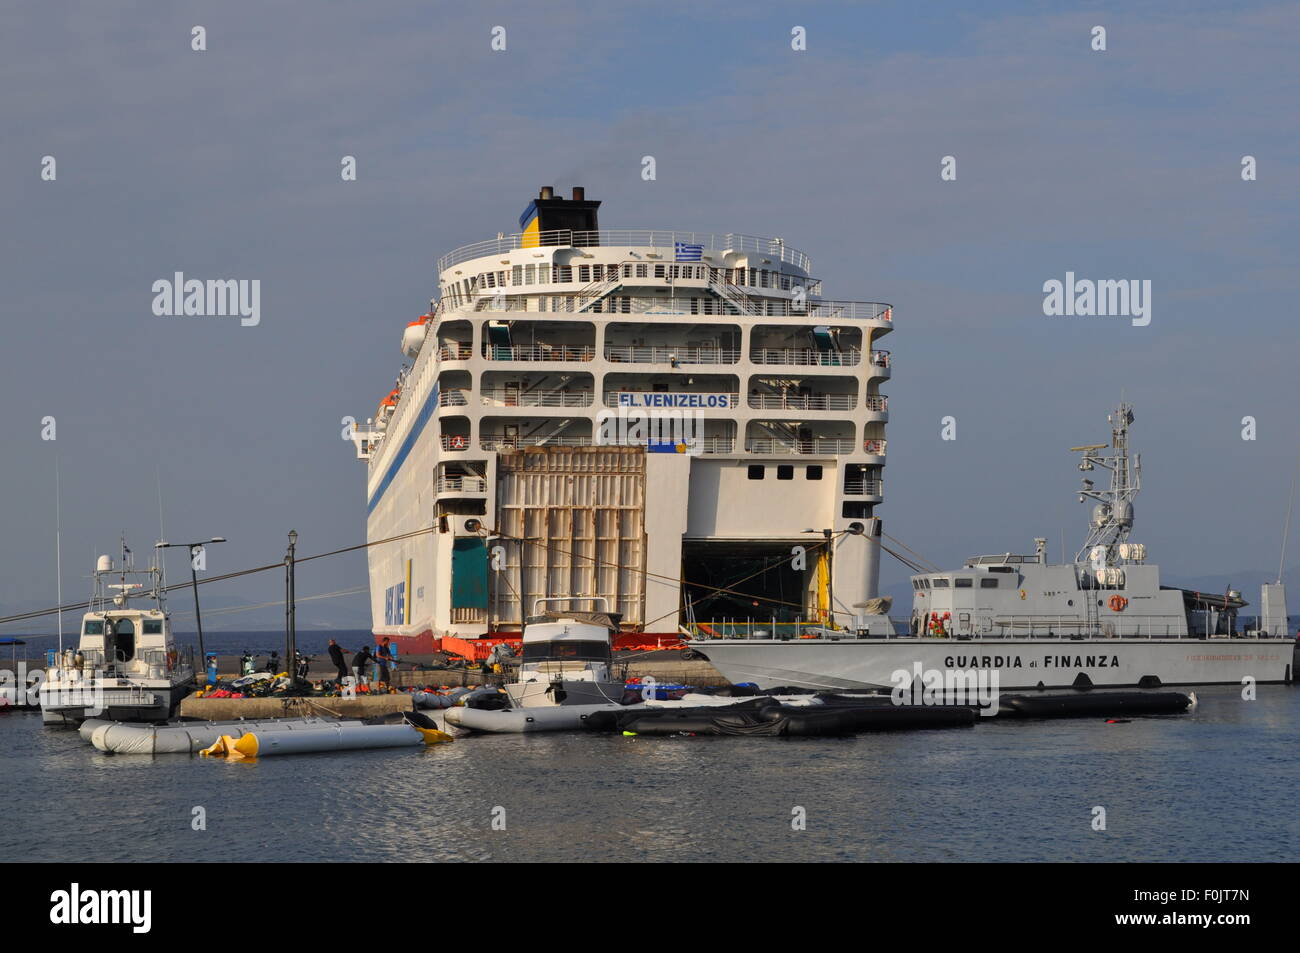 Kos, Greece. 15th Aug, 2015. Migrants and refugees wait at the port next to the ferry Eleftherios Venizelos after crossing from Turkey, at the southeastern island of Kos, Greece, Sturday, August 15, 2015. © Tereza Supova/CTK Photo/Alamy Live News Stock Photo